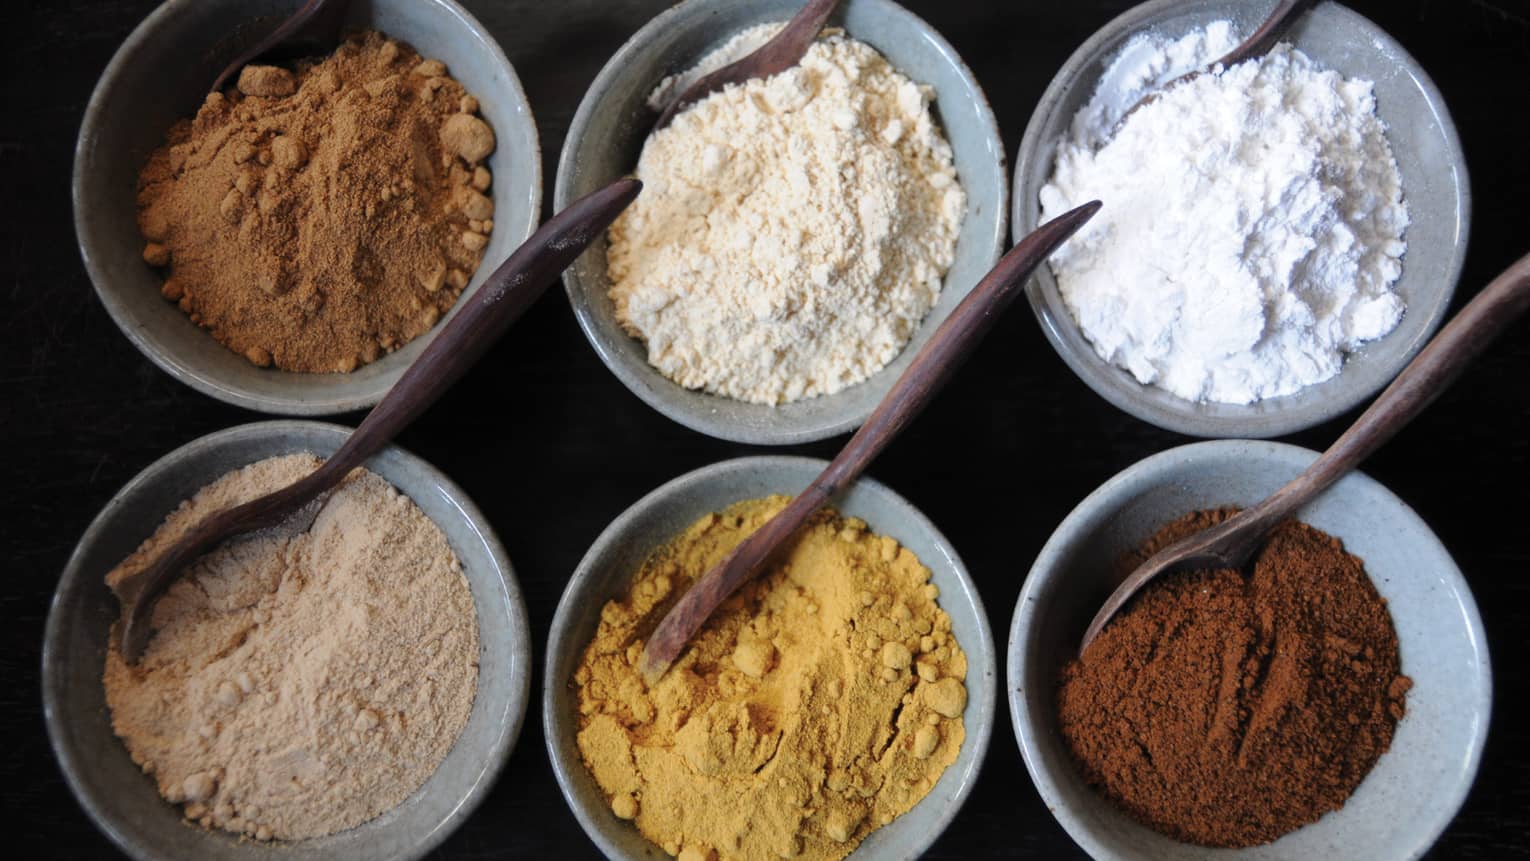 Aerial view of small spa bowls with powdered spices, clays, wood spoons